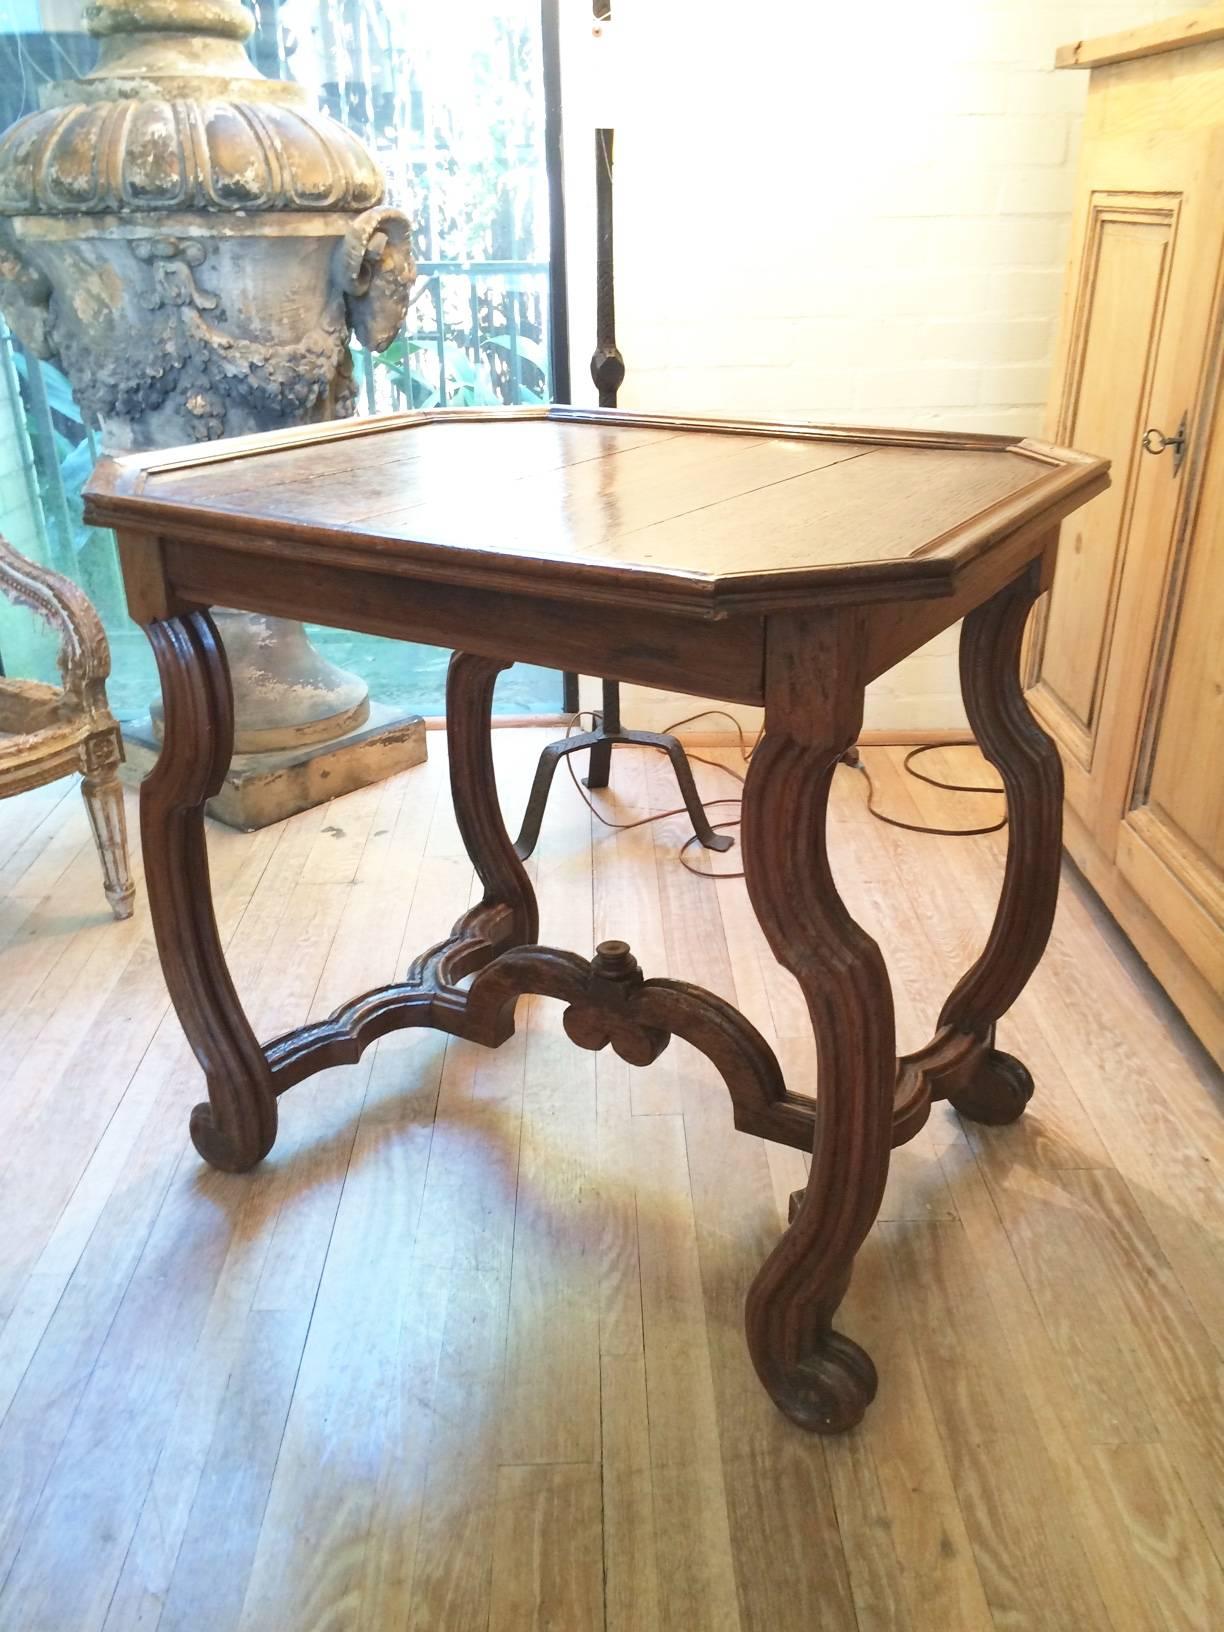 Handsome Louis XIV bold oak and walnut table with bold walnut curving and carved legs and stretchers and an oak tray top. Hidden drawer under top.